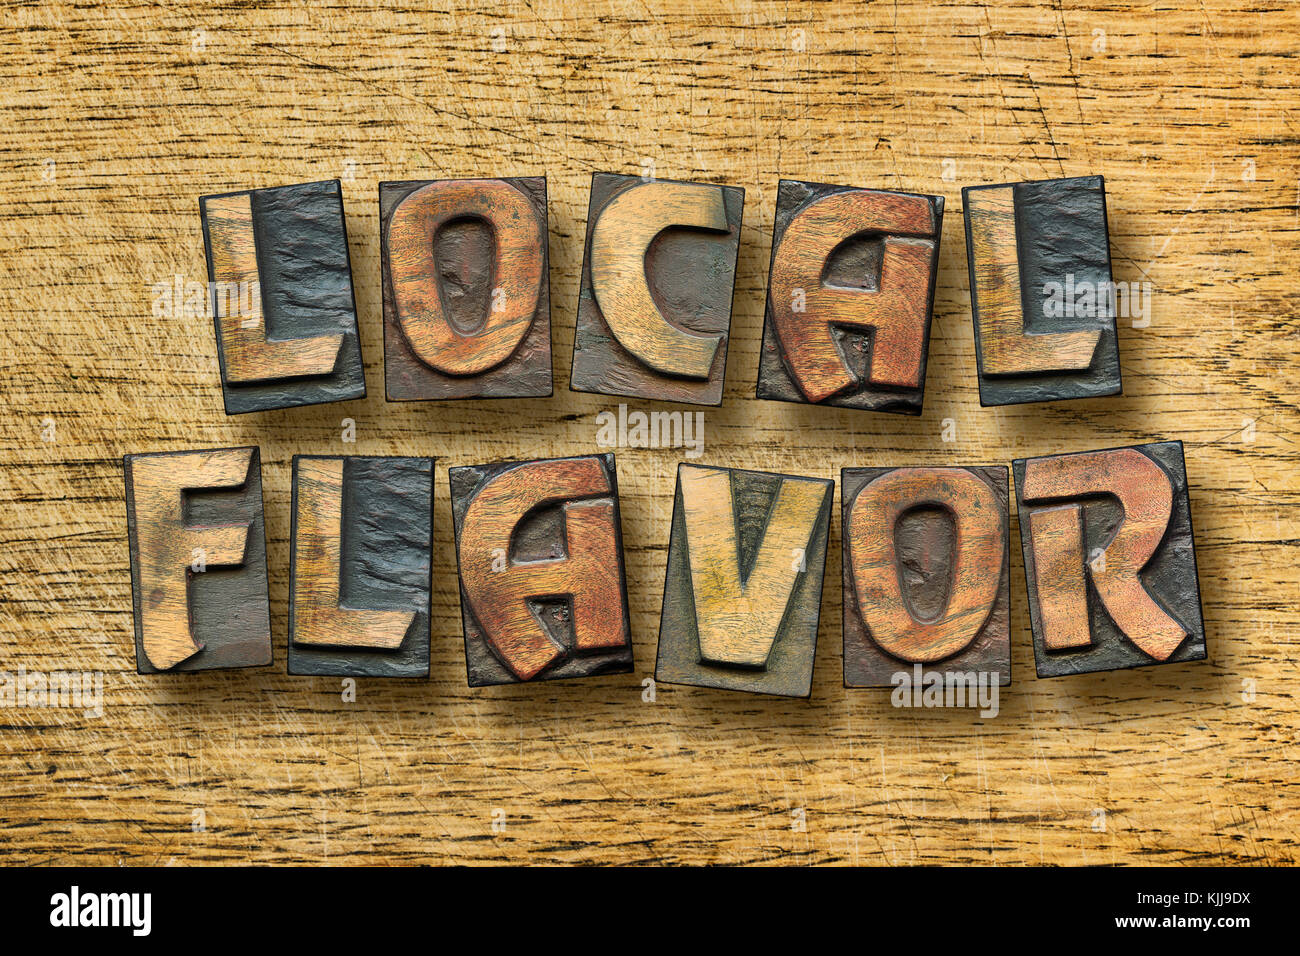 local flavor phrase assembled from scattered vintage letterpress blocks on scratched wooden background Stock Photo